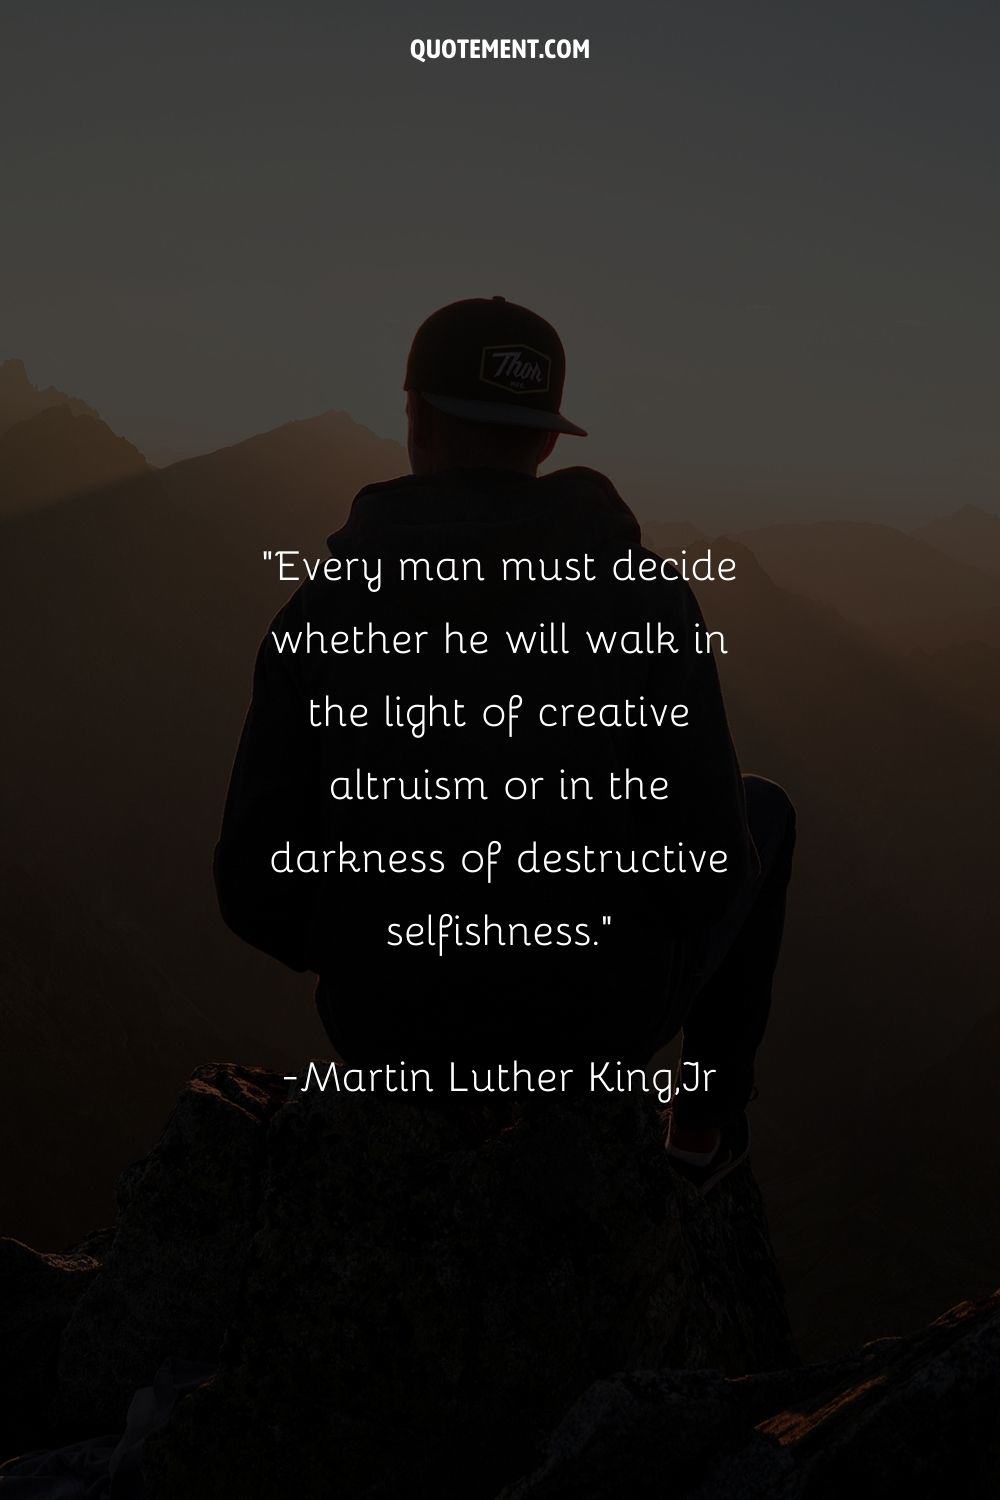 Every man must decide whether he will walk in the light of creative altruism or in the darkness of destructive selfishness